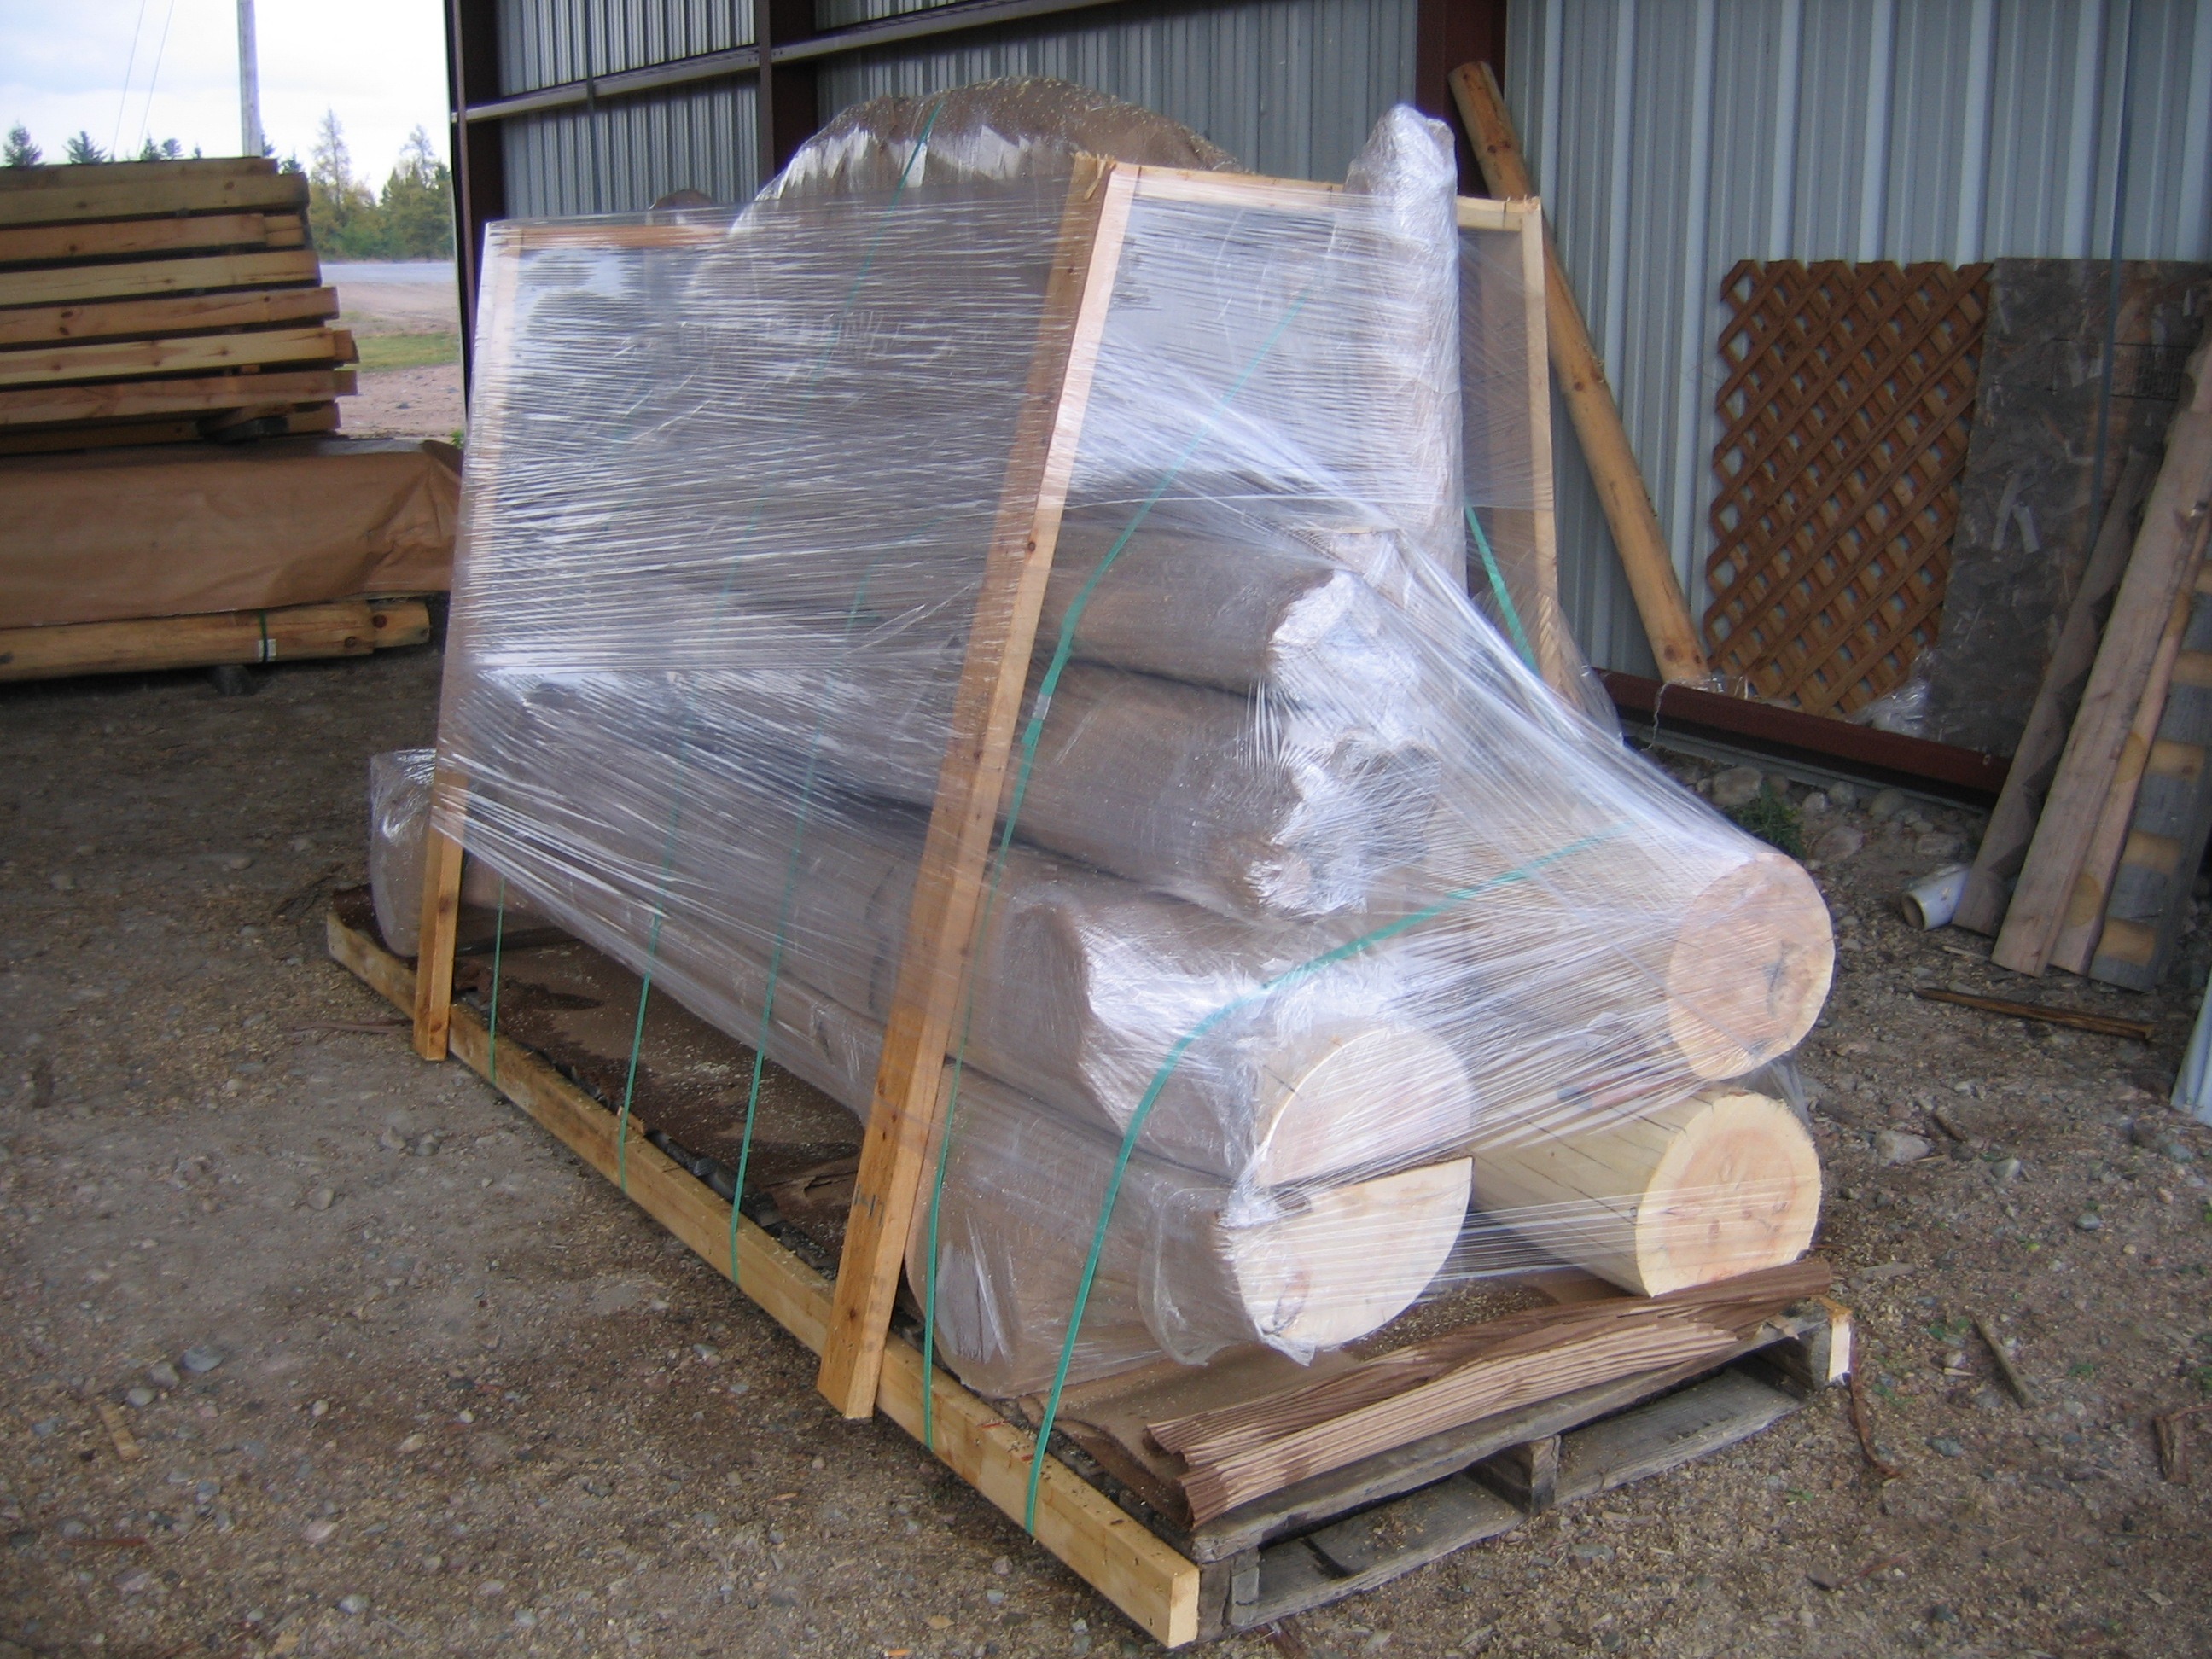 Timber logs packed for transport